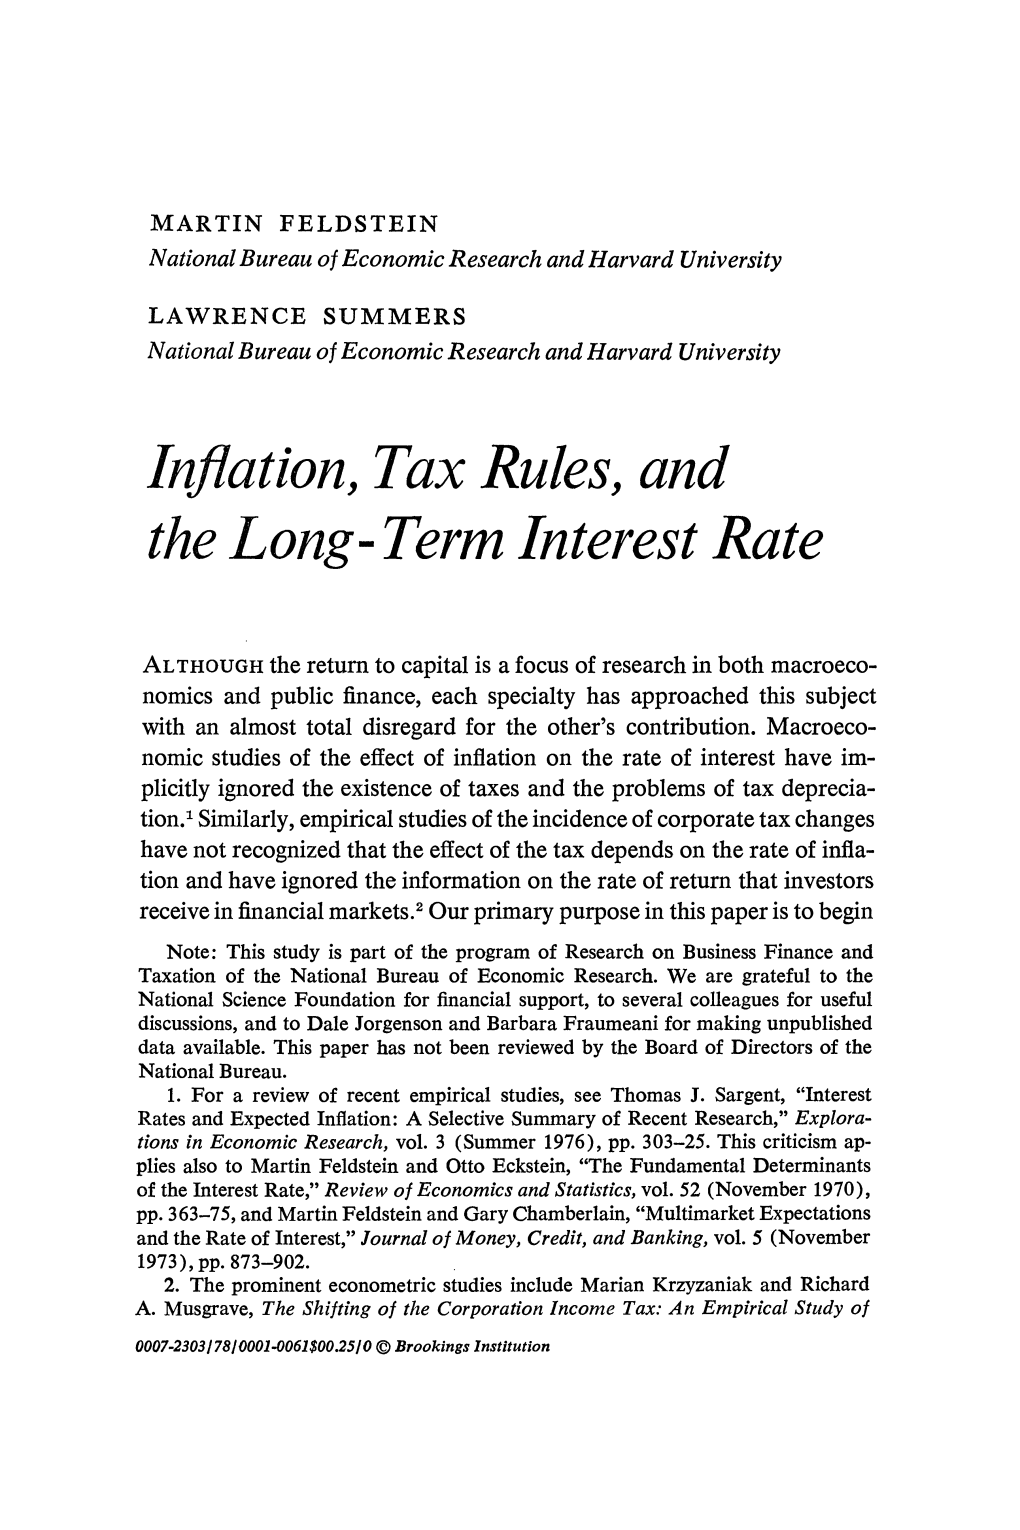 Inflation, Tax Rules, and the Long-Term Interest Rate